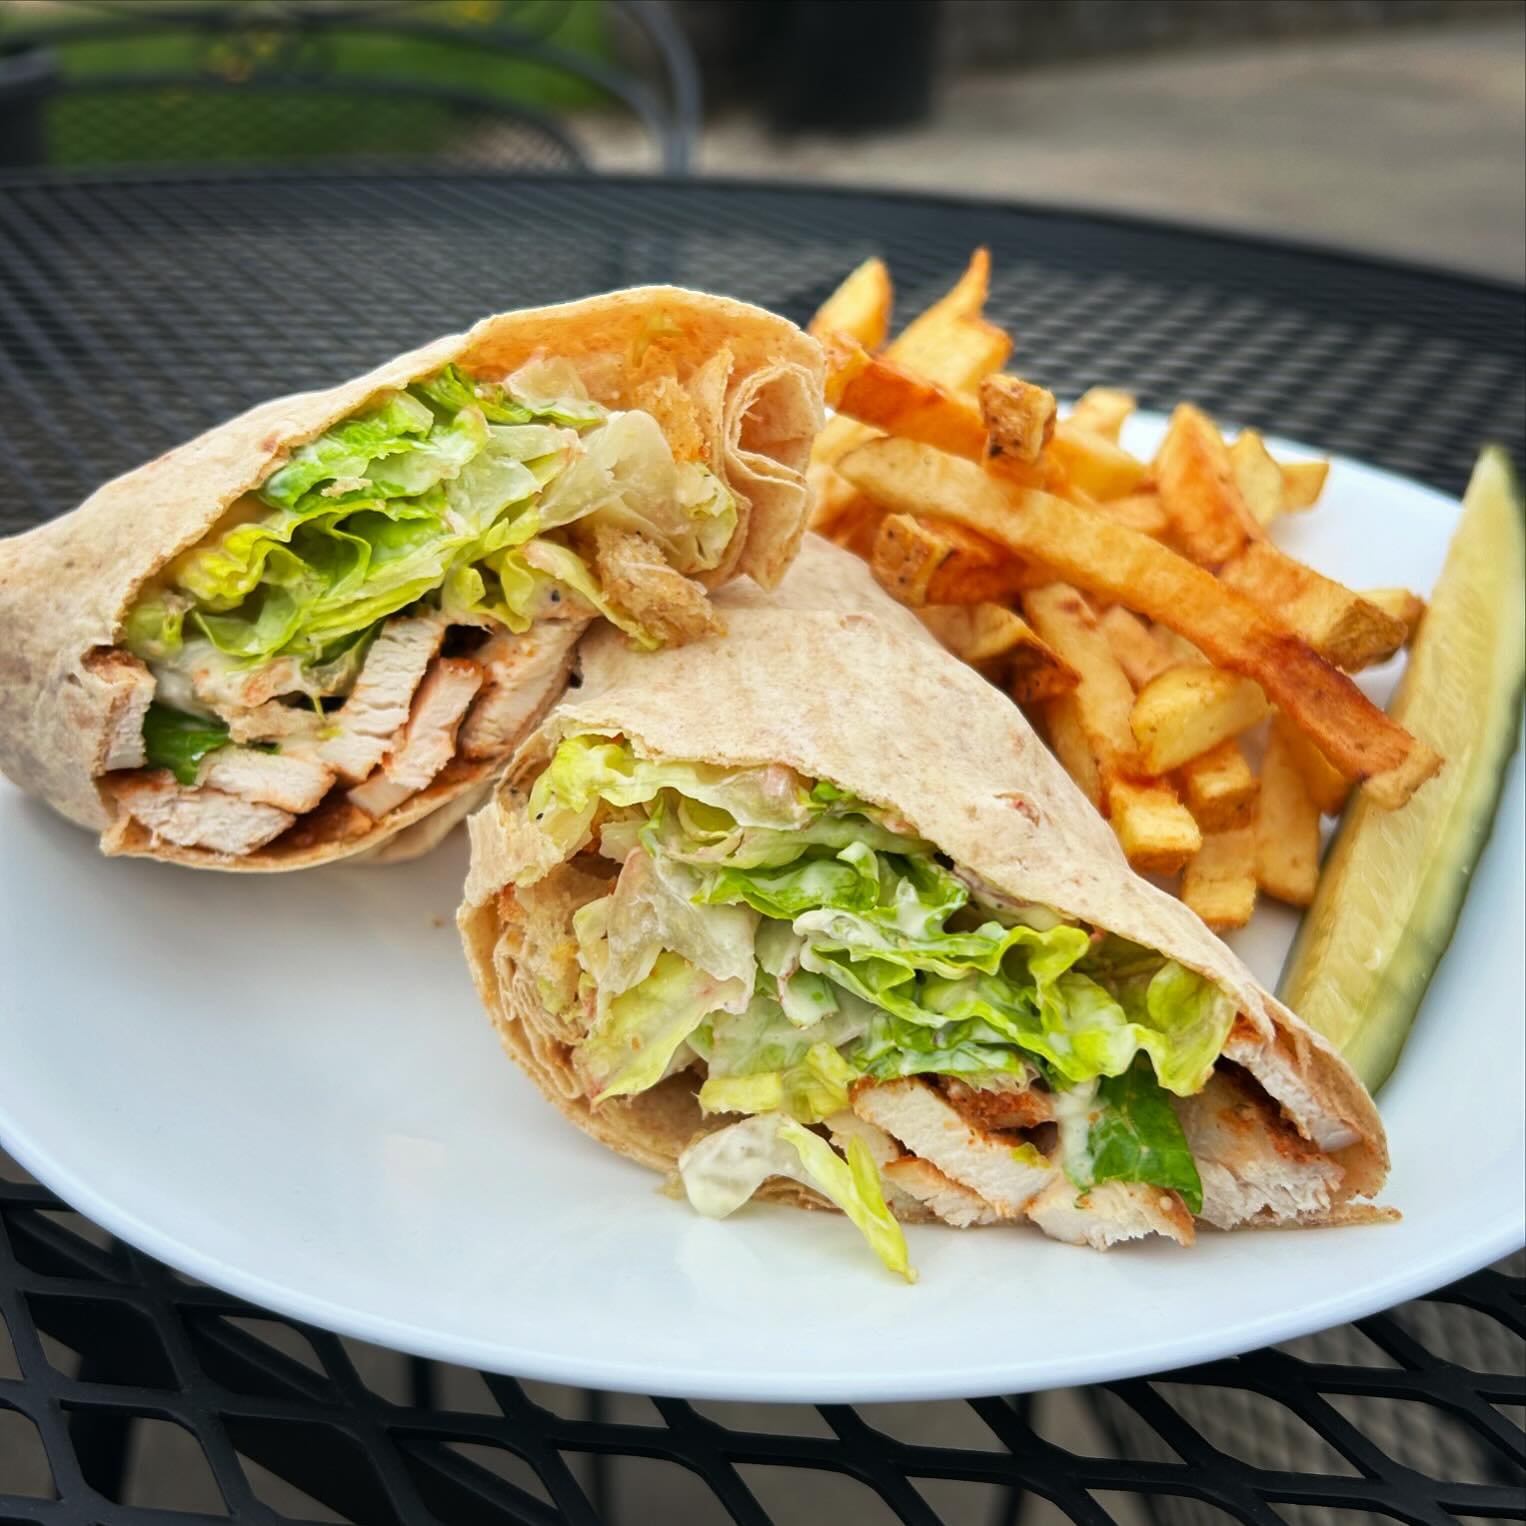 THURSDAY! Spring weather 🌼🌼🌼 making you hungry for lighter fare? Try one of our Chicken Caesar Wraps 🌯 feat. Cajun-blackened Pine Tree Poultry chicken breast, crisp romaine, Parmesan &amp; house caesar dressing, all rolled up in lavash bread w/ a